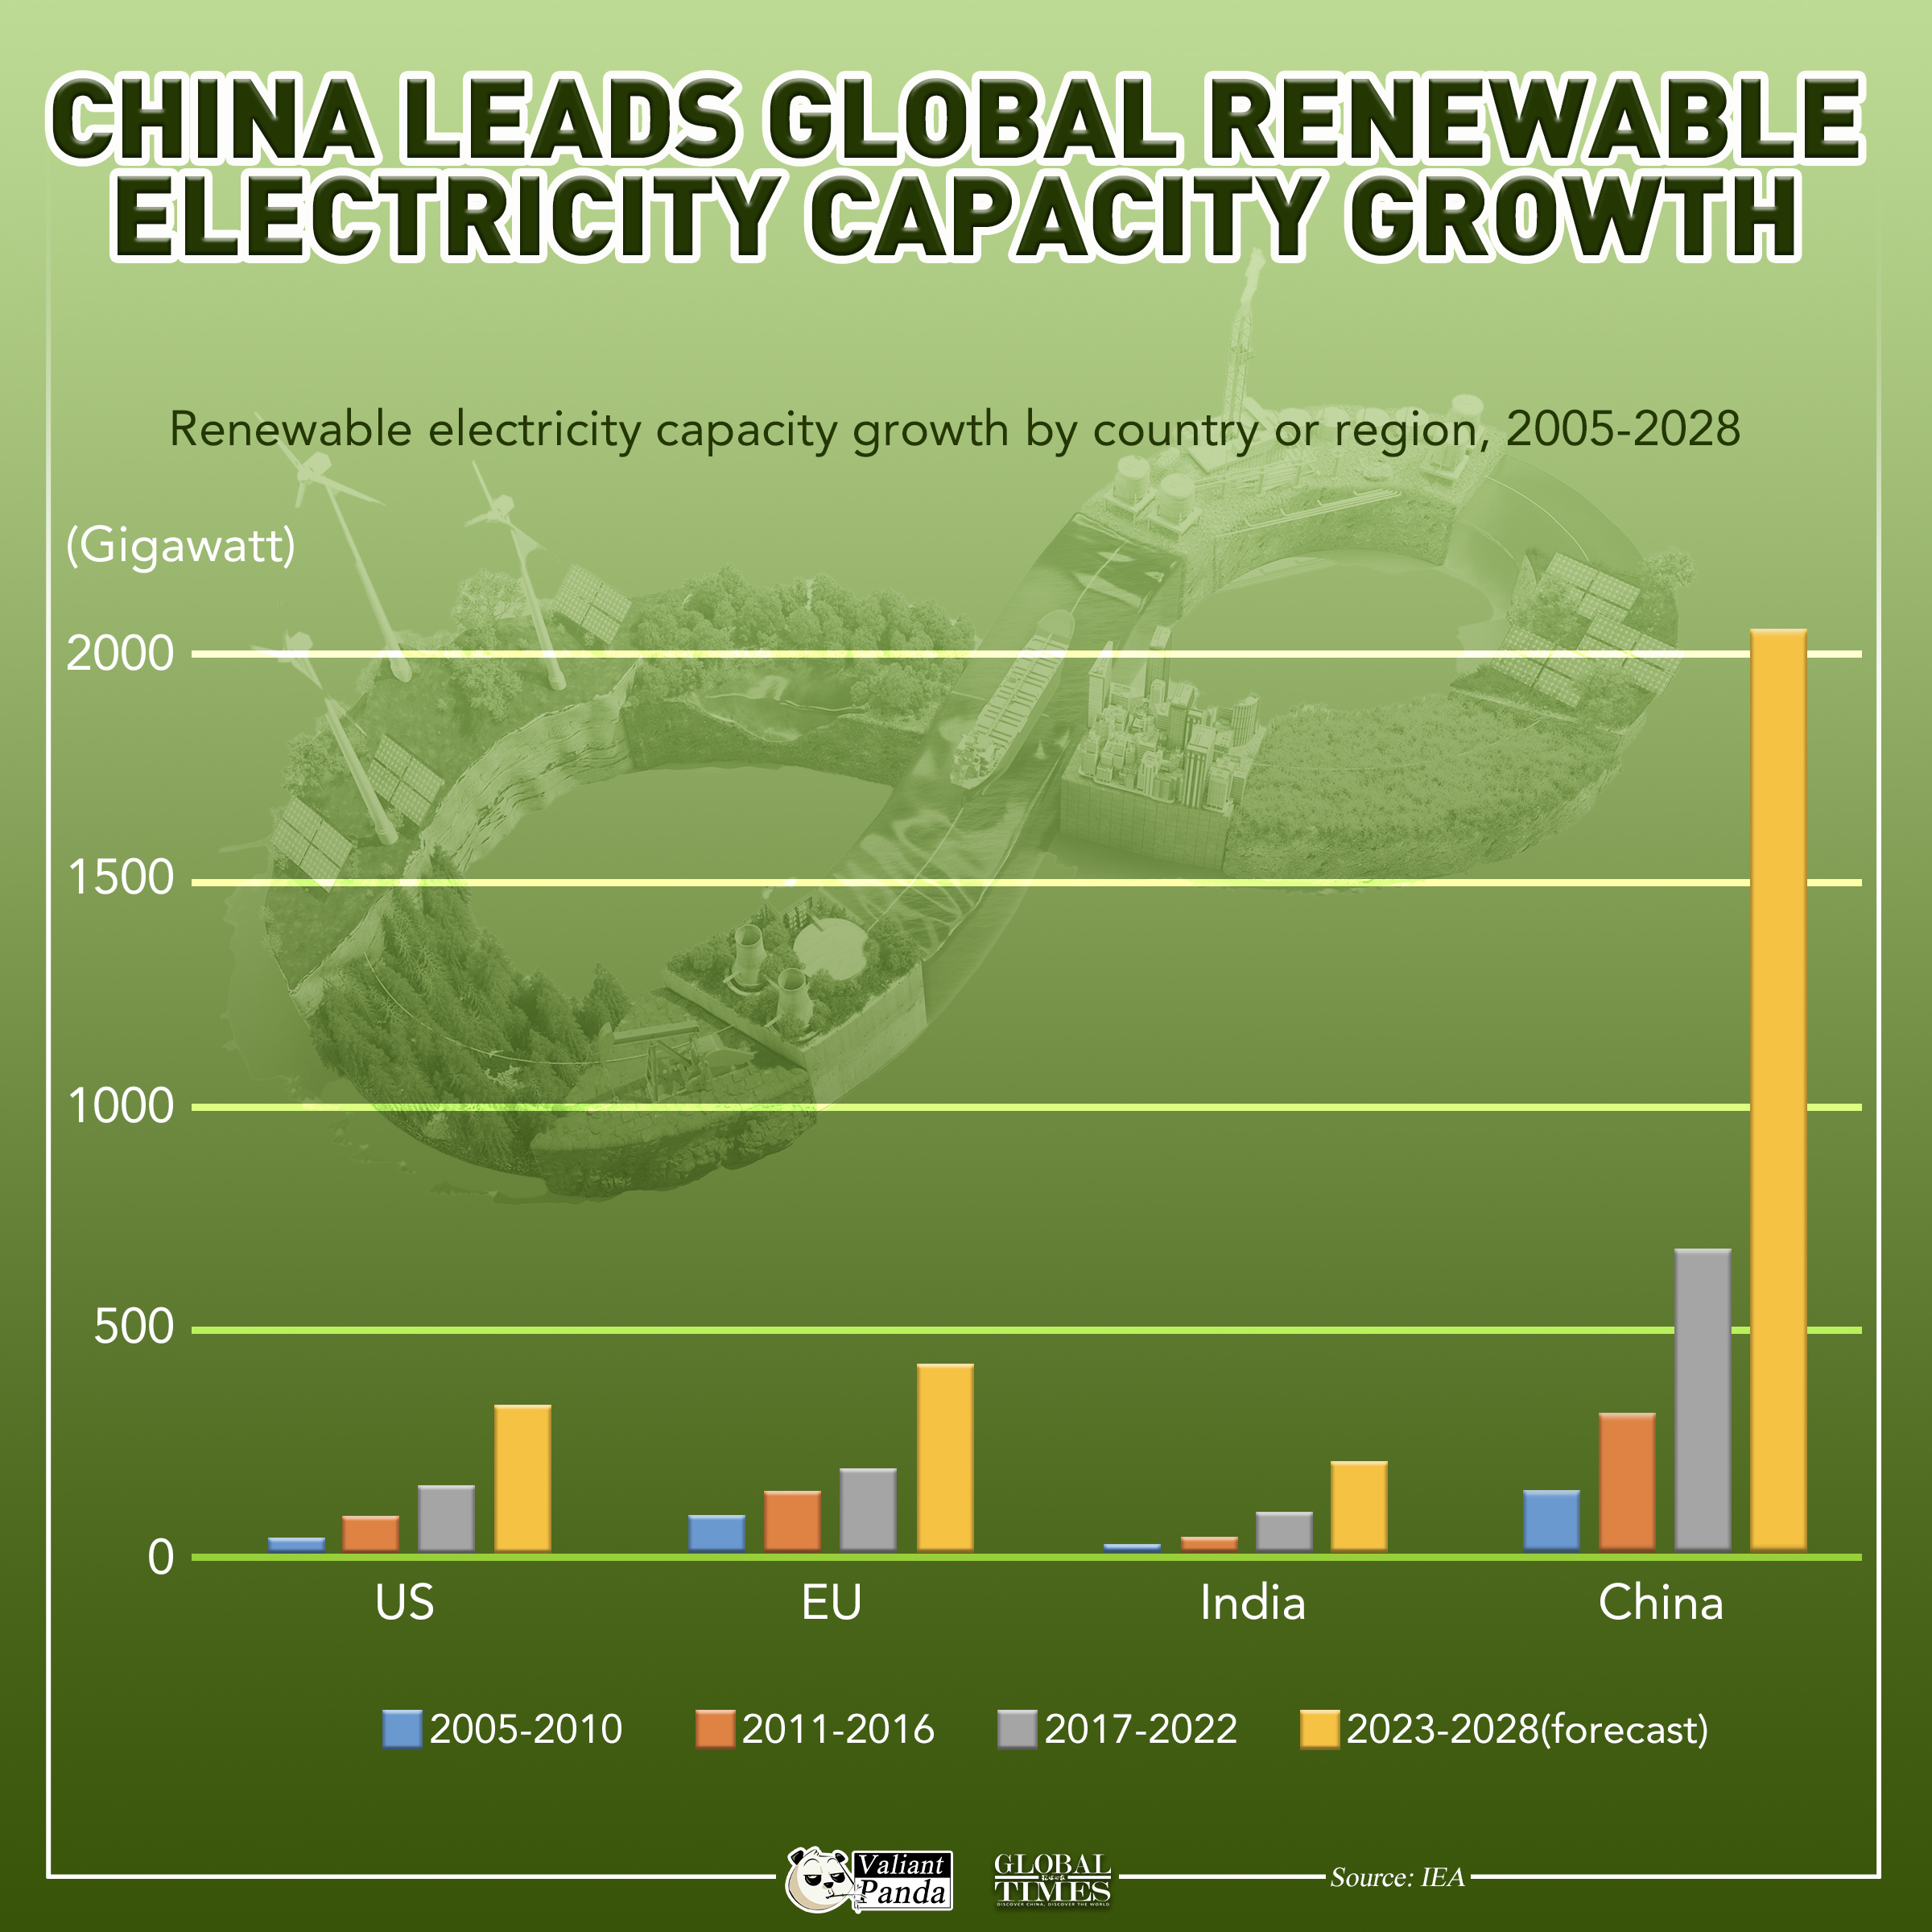 Over the period 2023-2028, 56% of global renewable electricity capacity growth will come from China. China will deploy almost four times more renewable capacity than the EU and five times more than the US. Graphic:GT